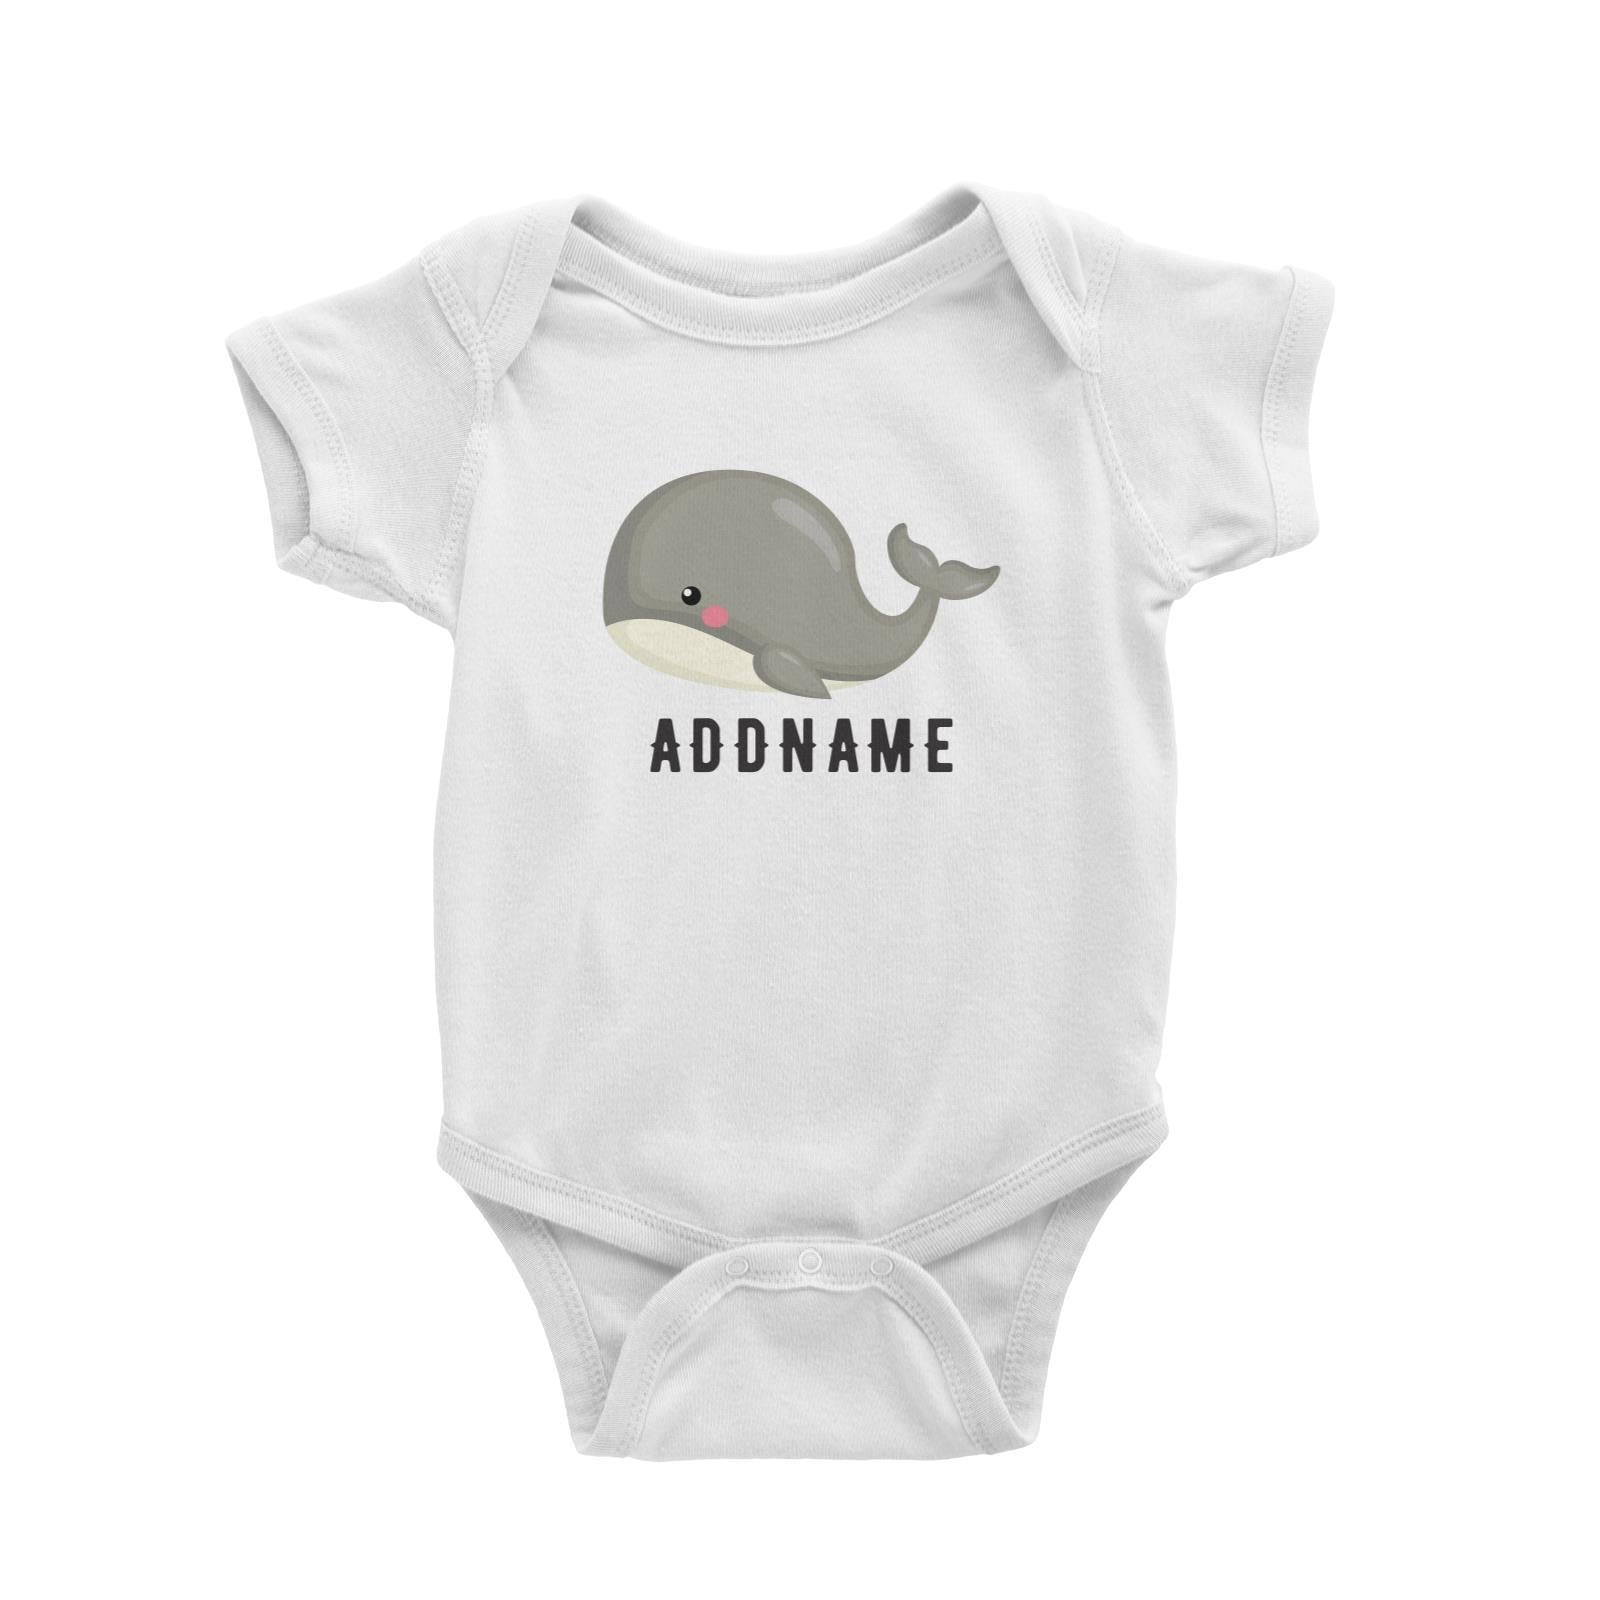 Birthday Sailor Baby Whale Addname Baby Romper